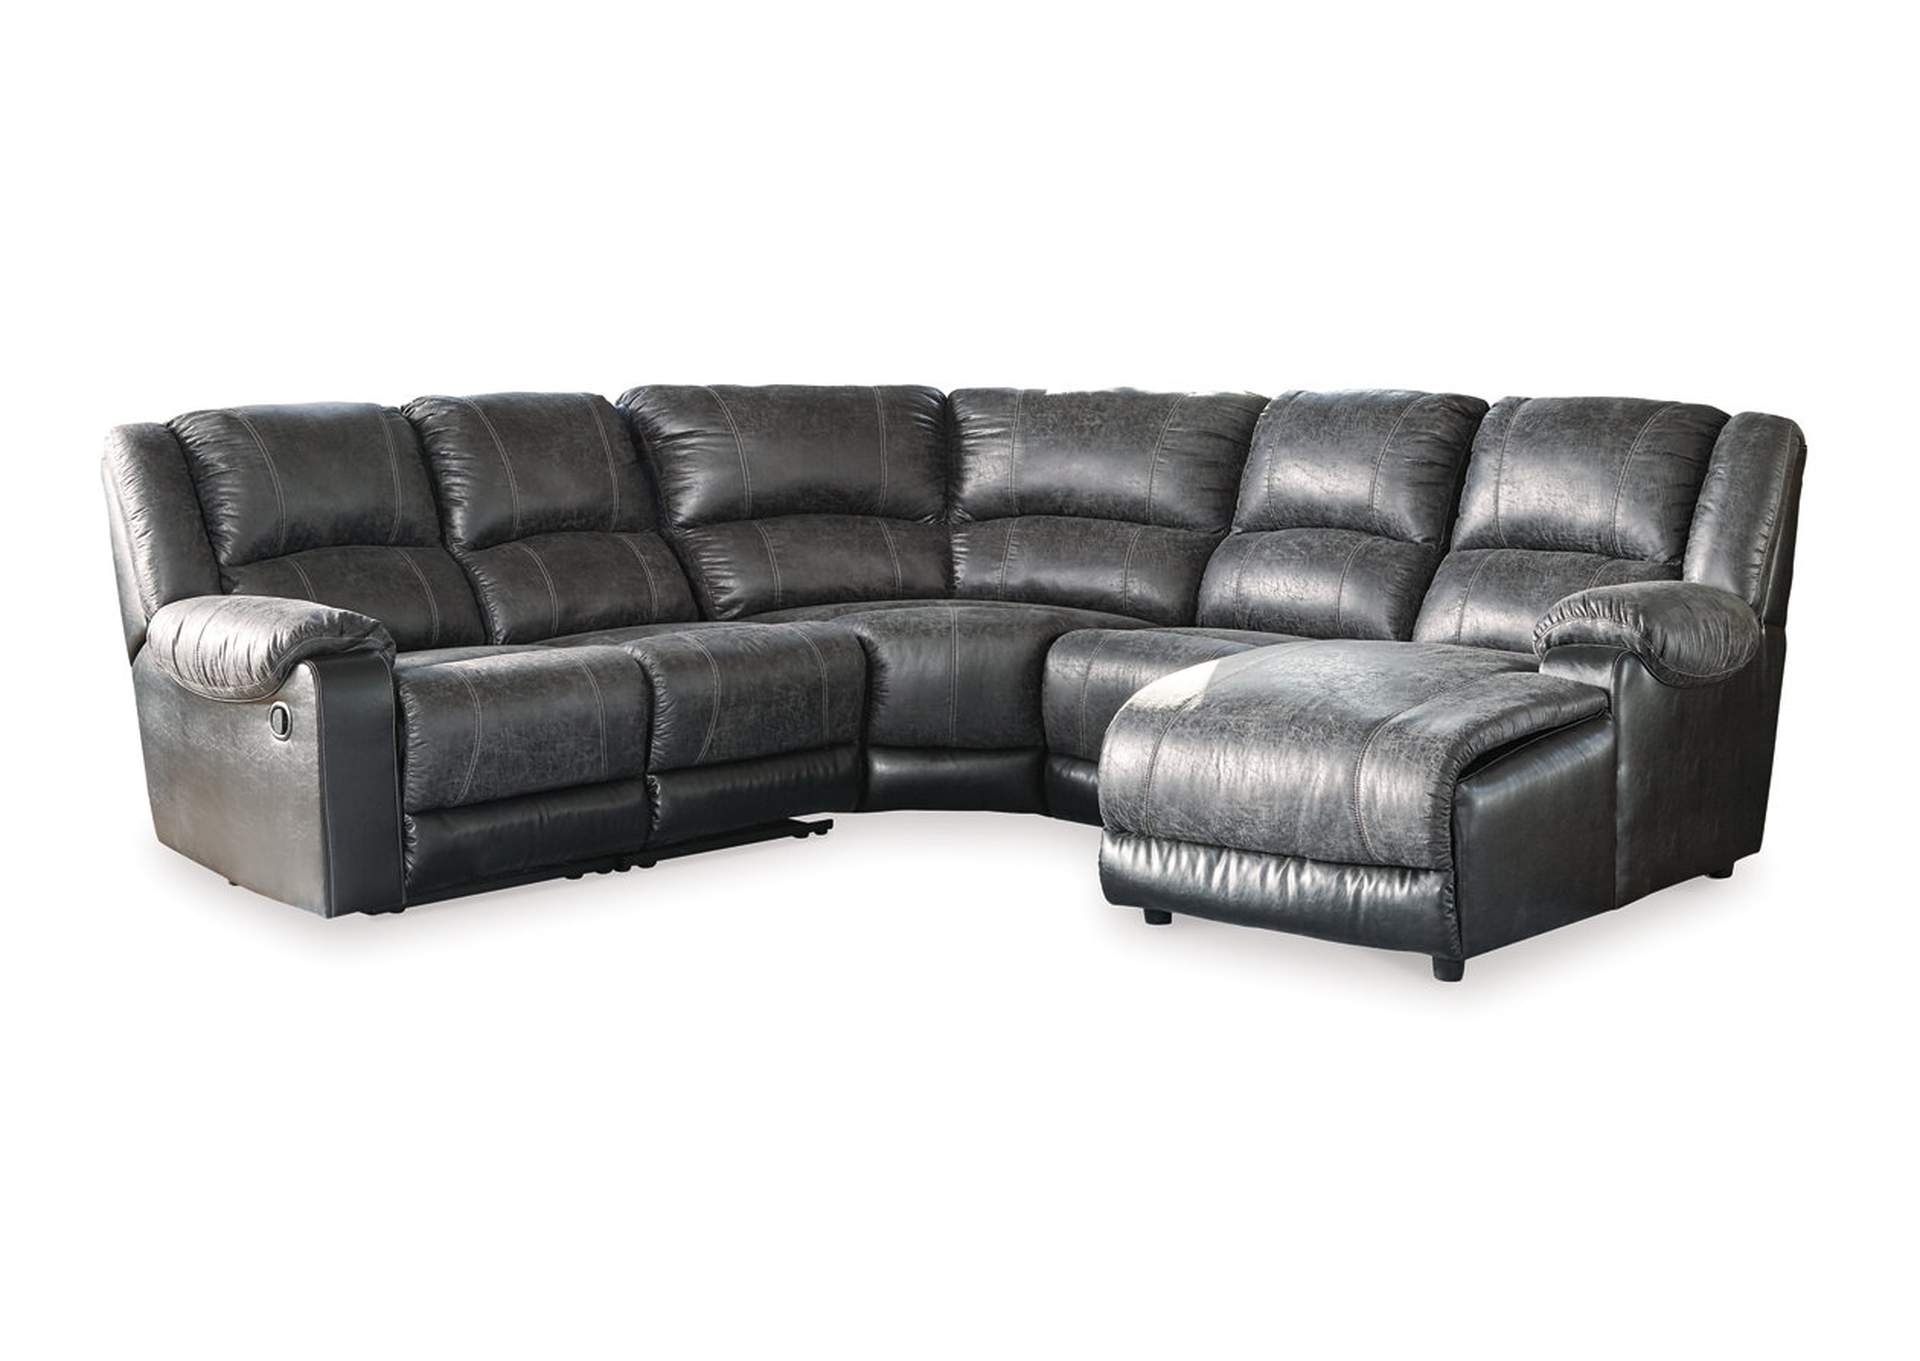 Nantahala 5-Piece Reclining Sectional with Chaise,Signature Design By Ashley